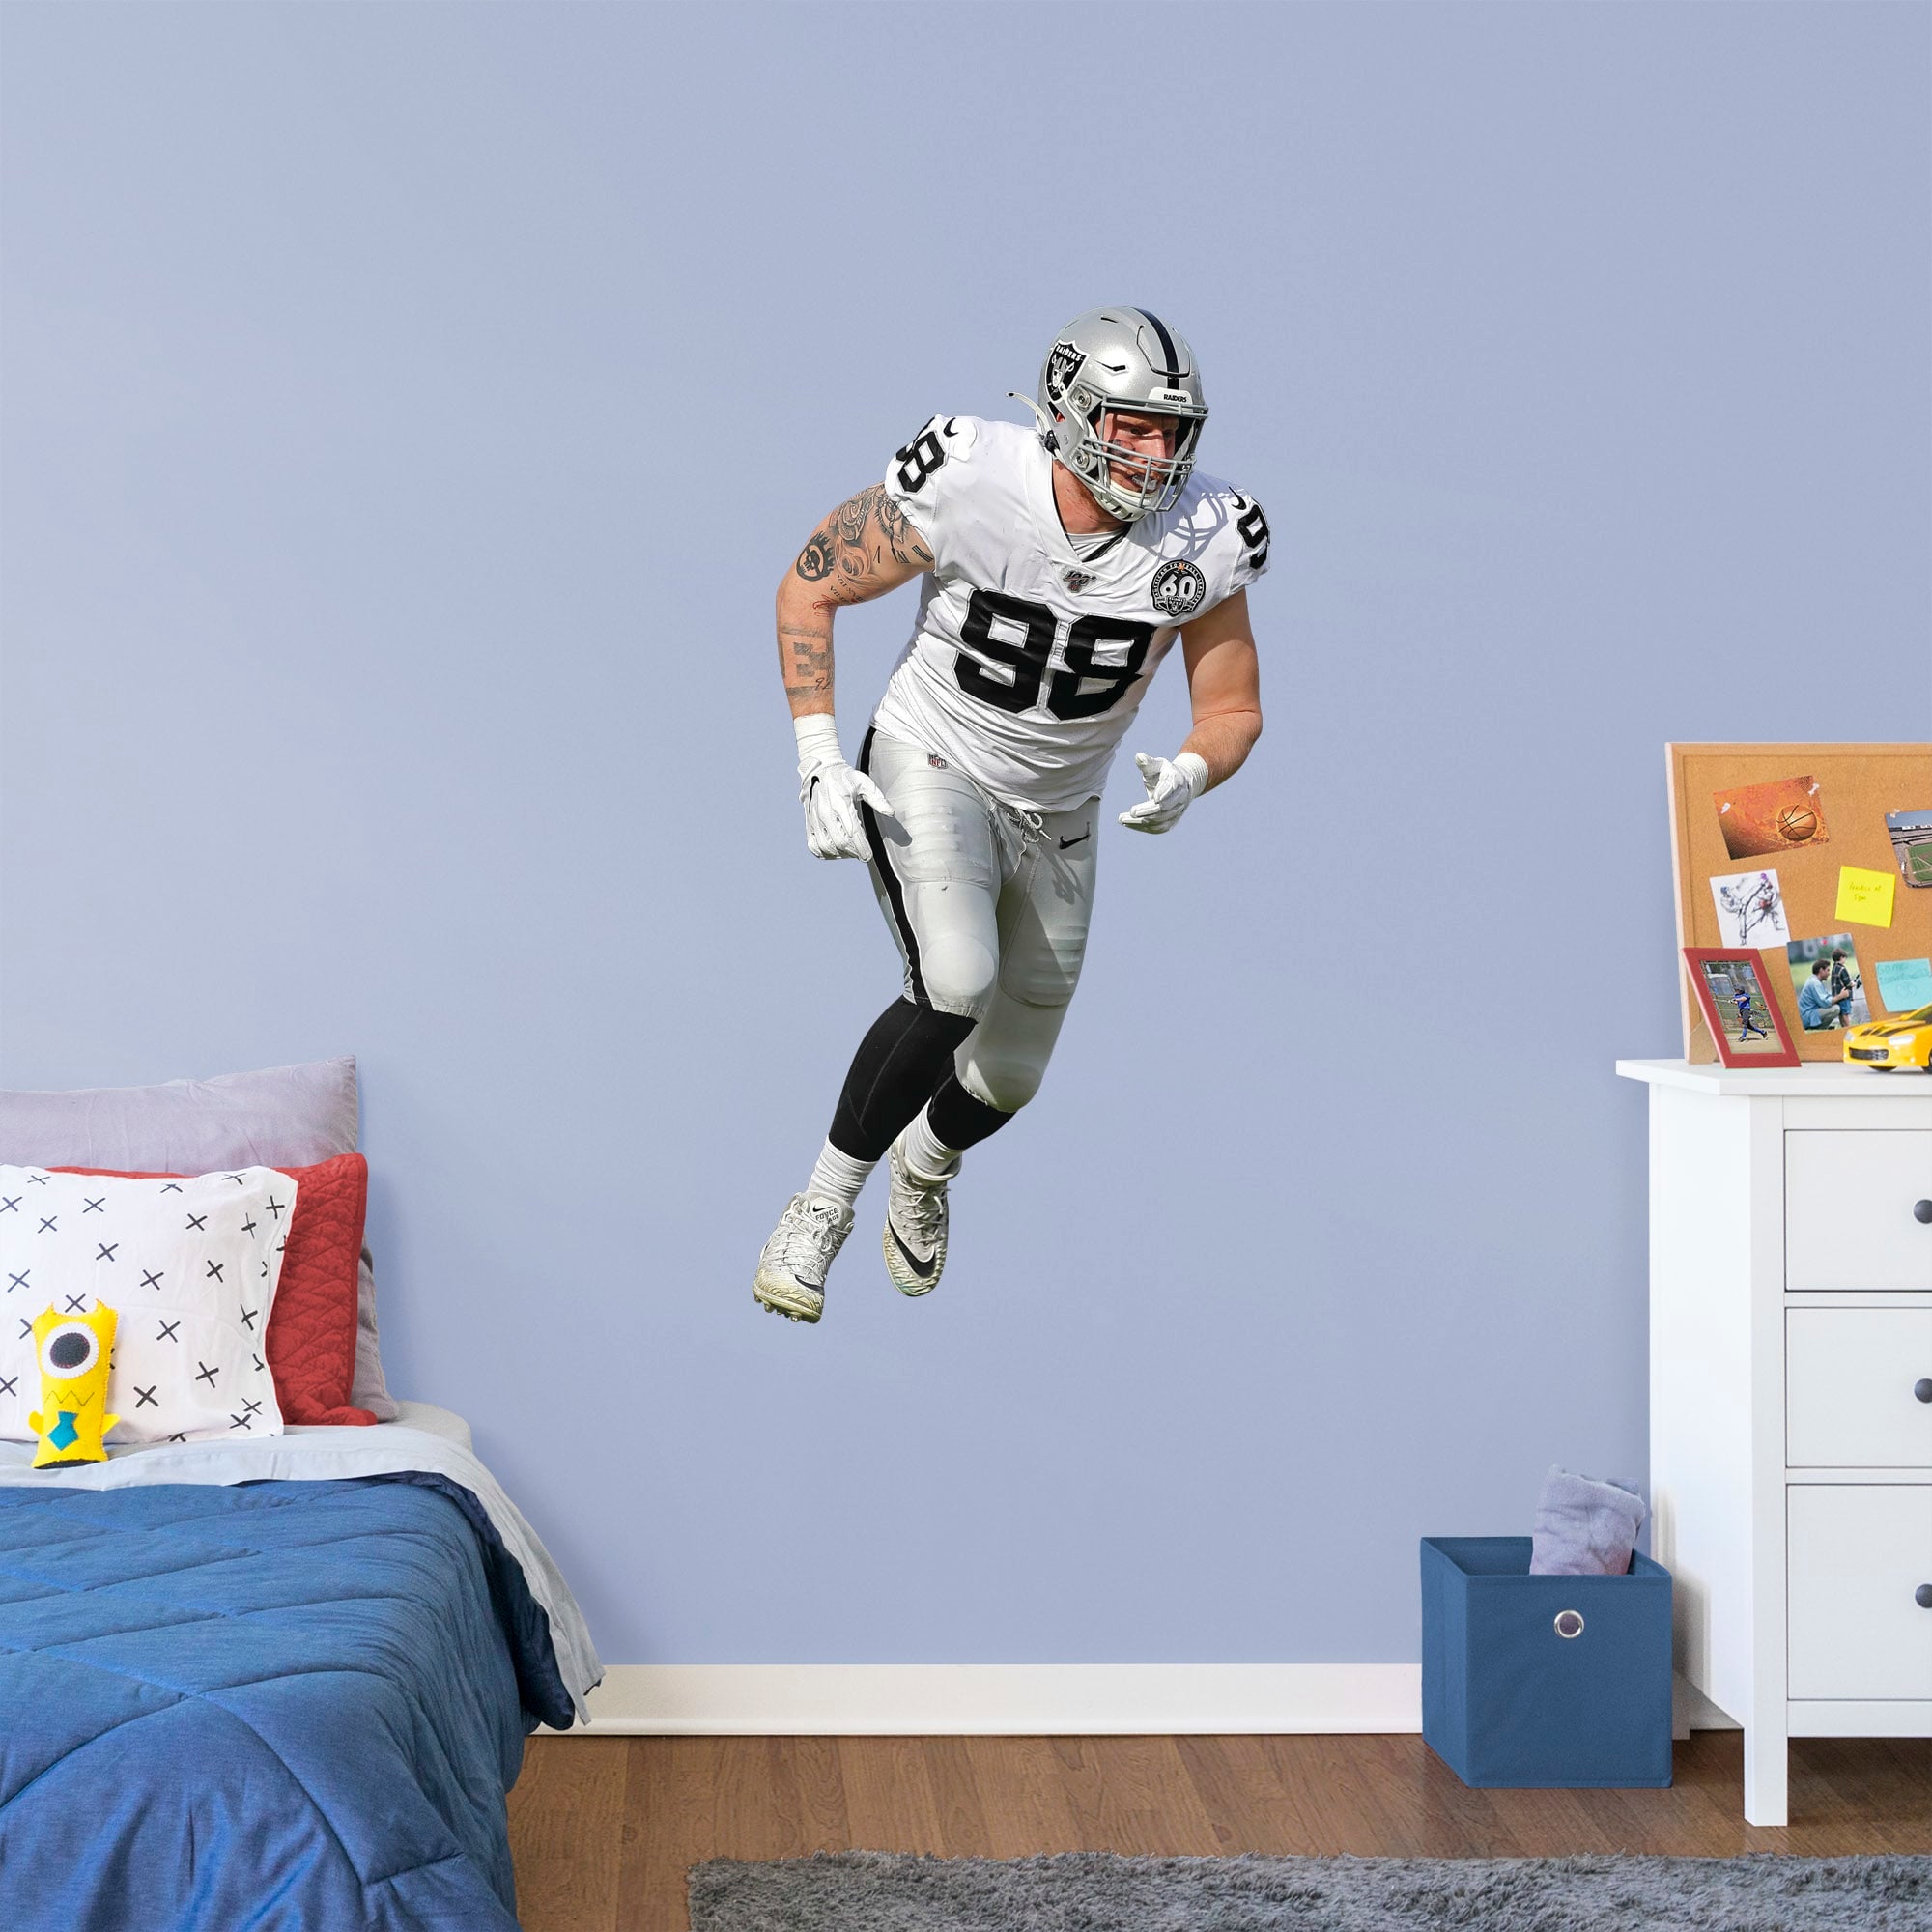 Maxx Crosby for Las Vegas Raiders - Officially Licensed NFL Removable Wall Decal Giant Athlete + 2 Decals (26"W x 51"H) by Fathe